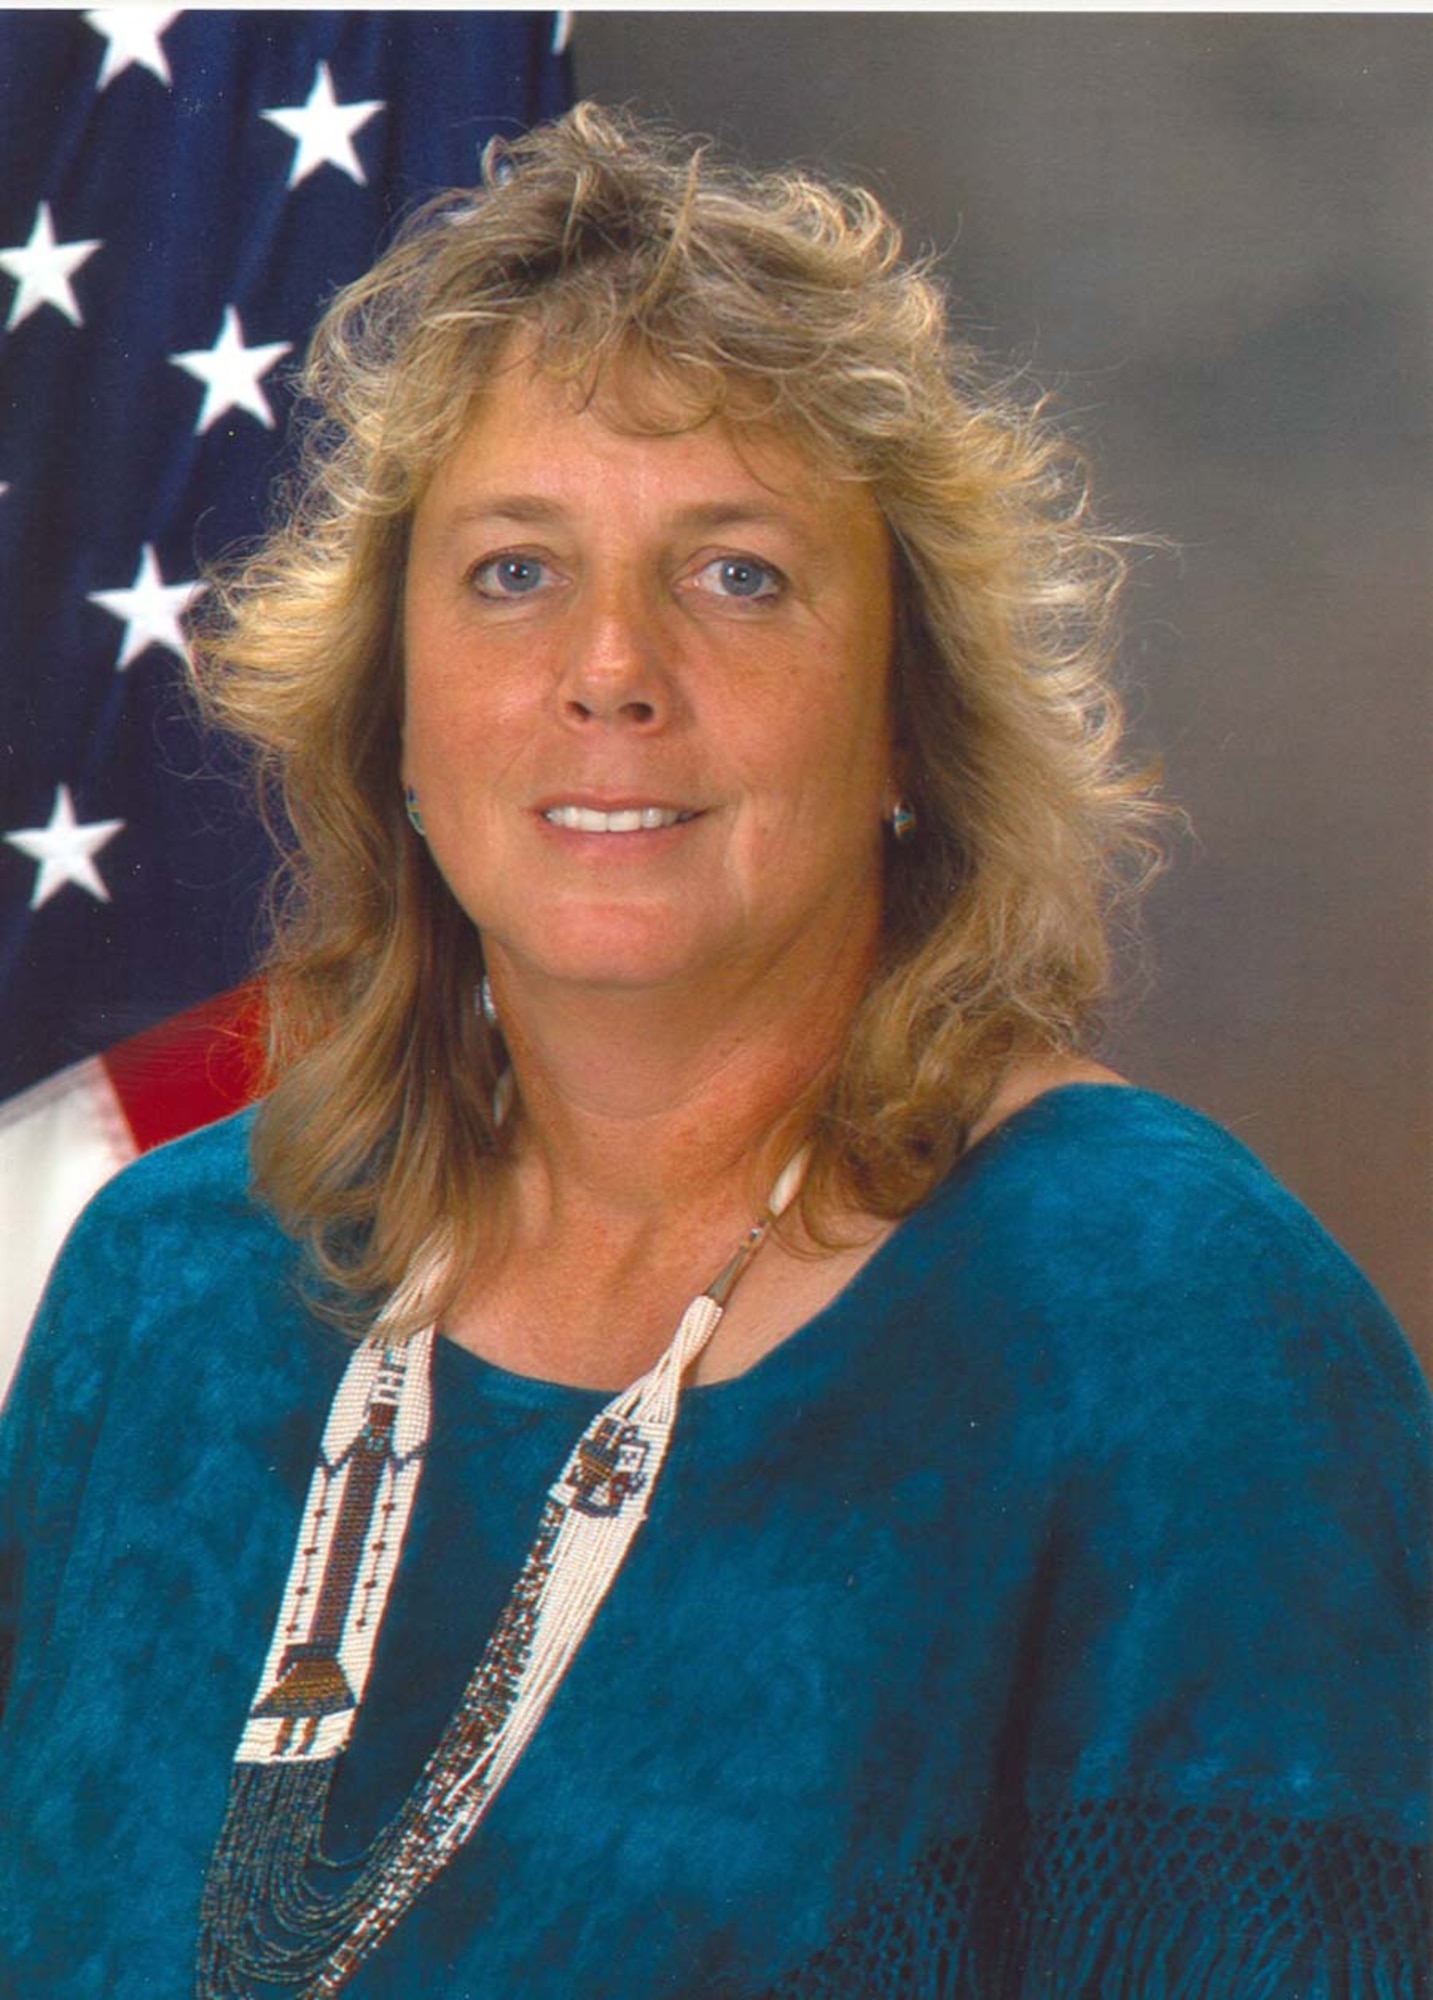 Ms. Sandra Lasher from the Air Force Operational Test and Evaluation Center's Detachment 4 at Peterson AFB, Colo., is the 2009 AFOTEC Category II Civilian of the Year.